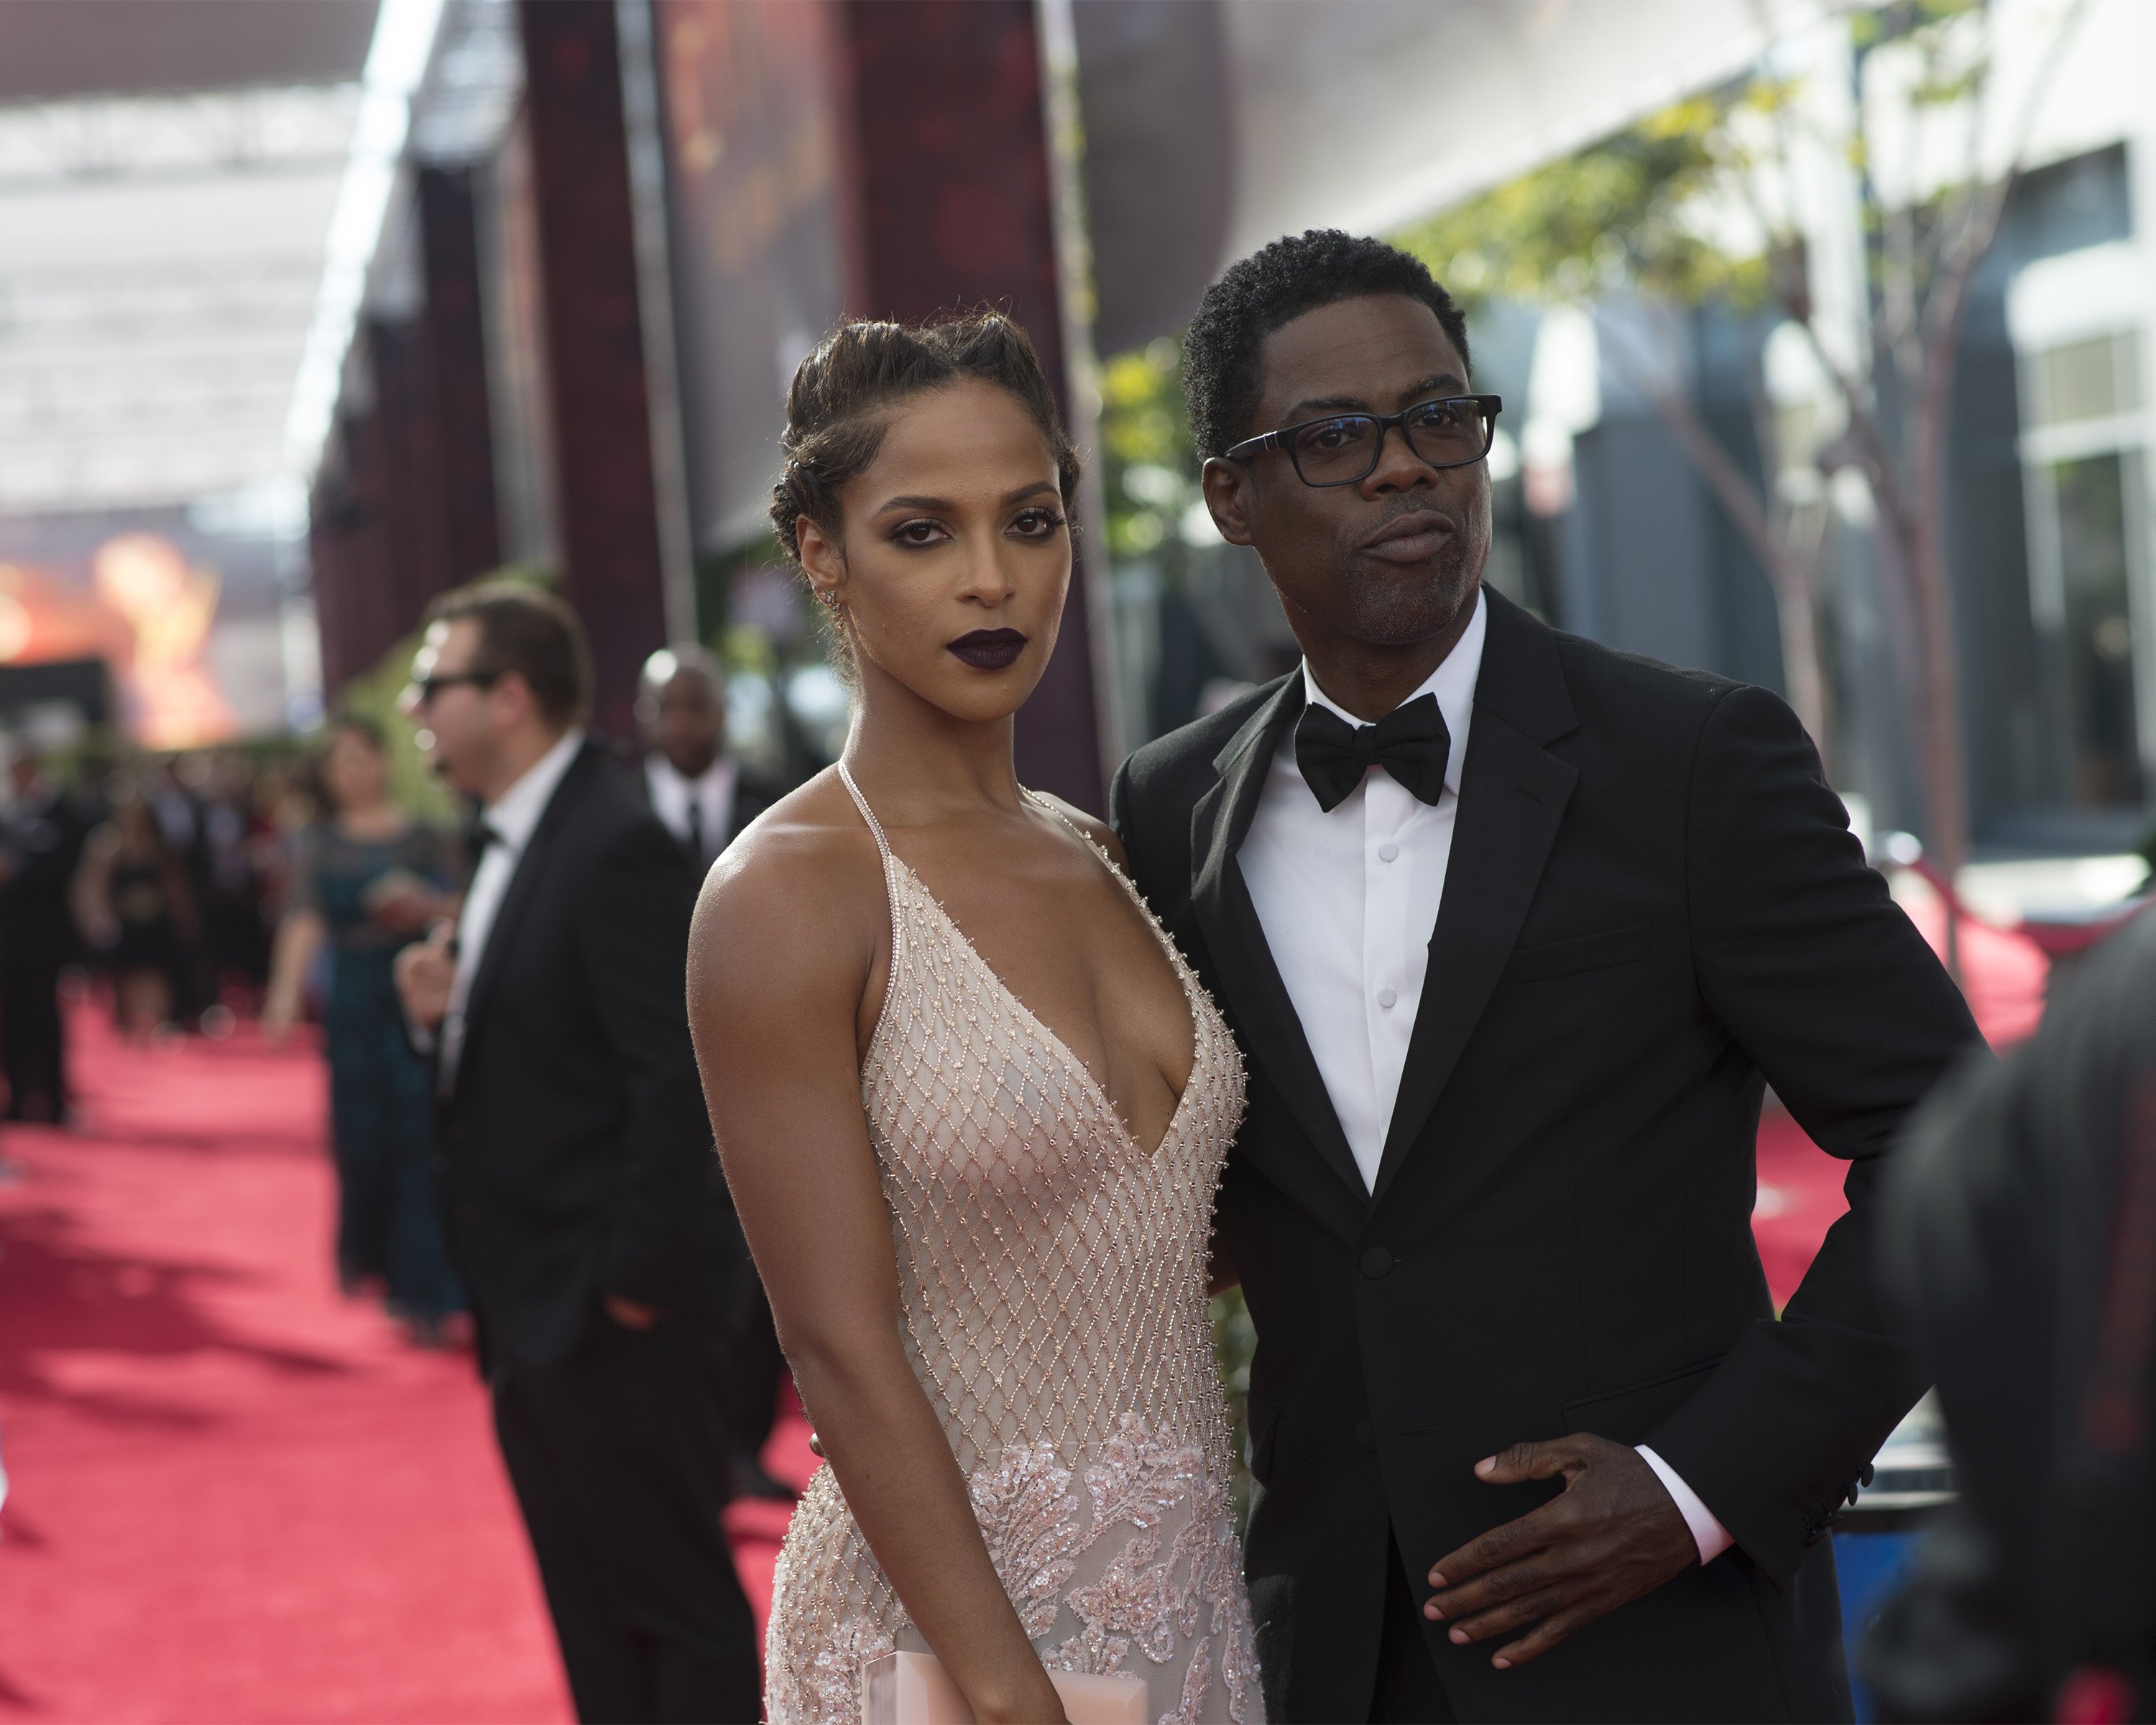 Chris Rock and Megalyn Echikunwoke at the 68th Emmy Awards on September 18, 2016 | Source: Getty Images